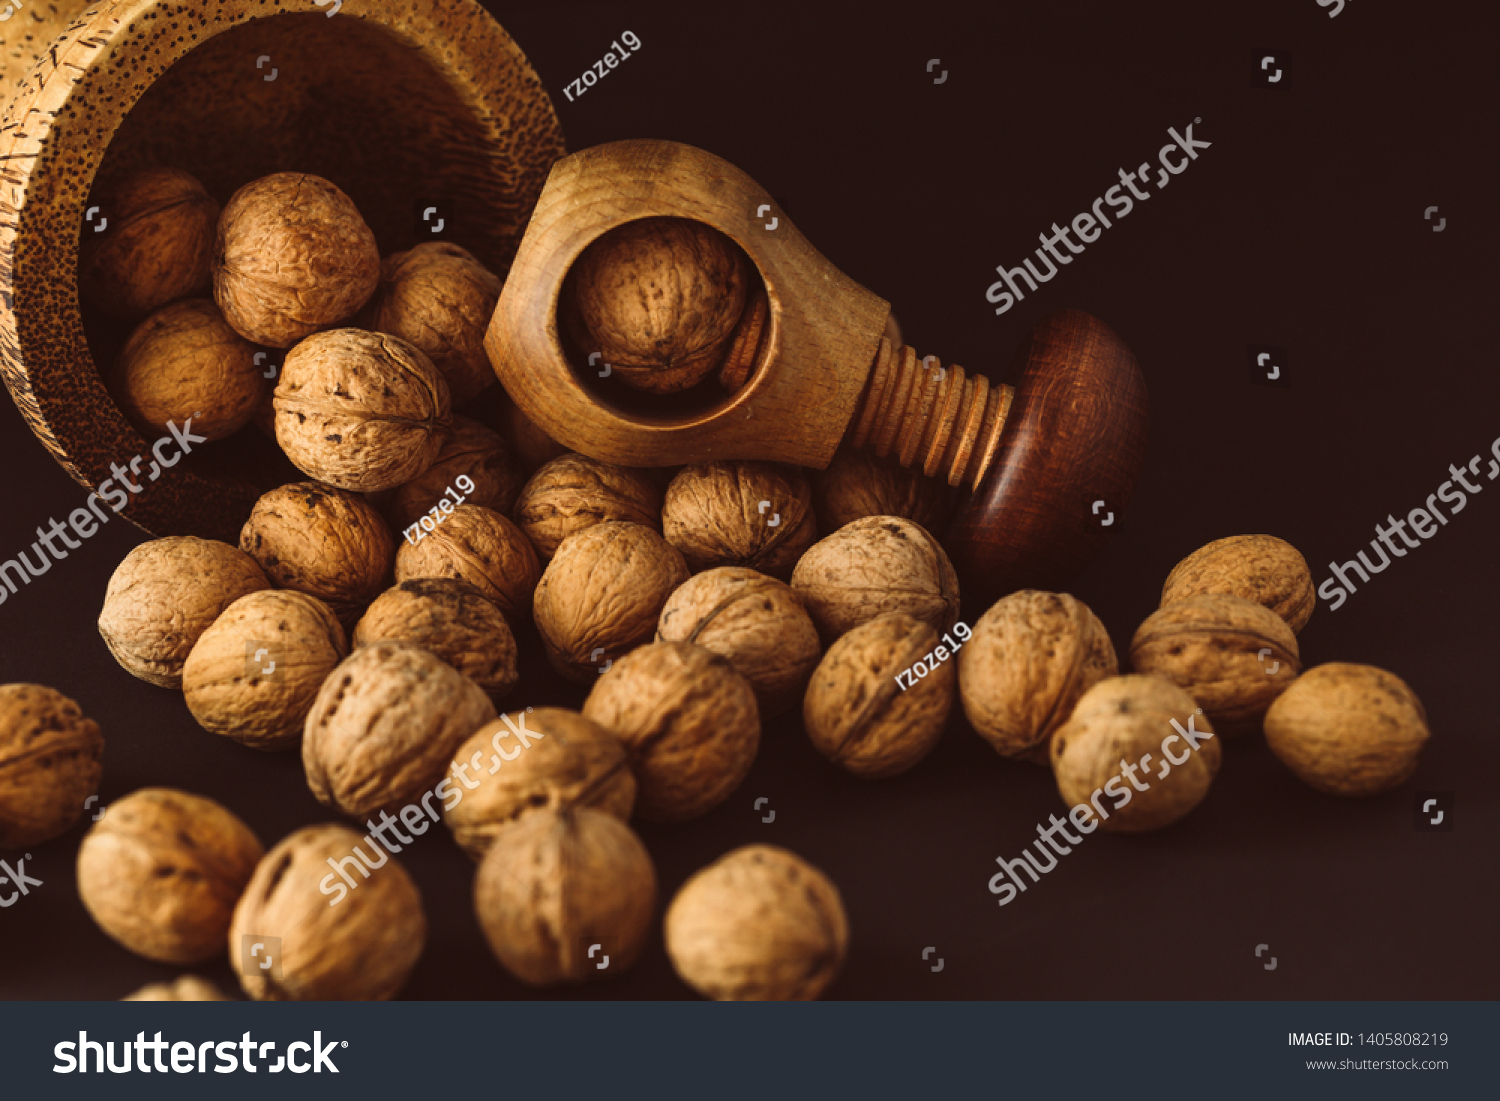 Italian nuts. Wooden nutcracker. Scattered nuts on a table with shallow depth of depth and depth. #1405808219